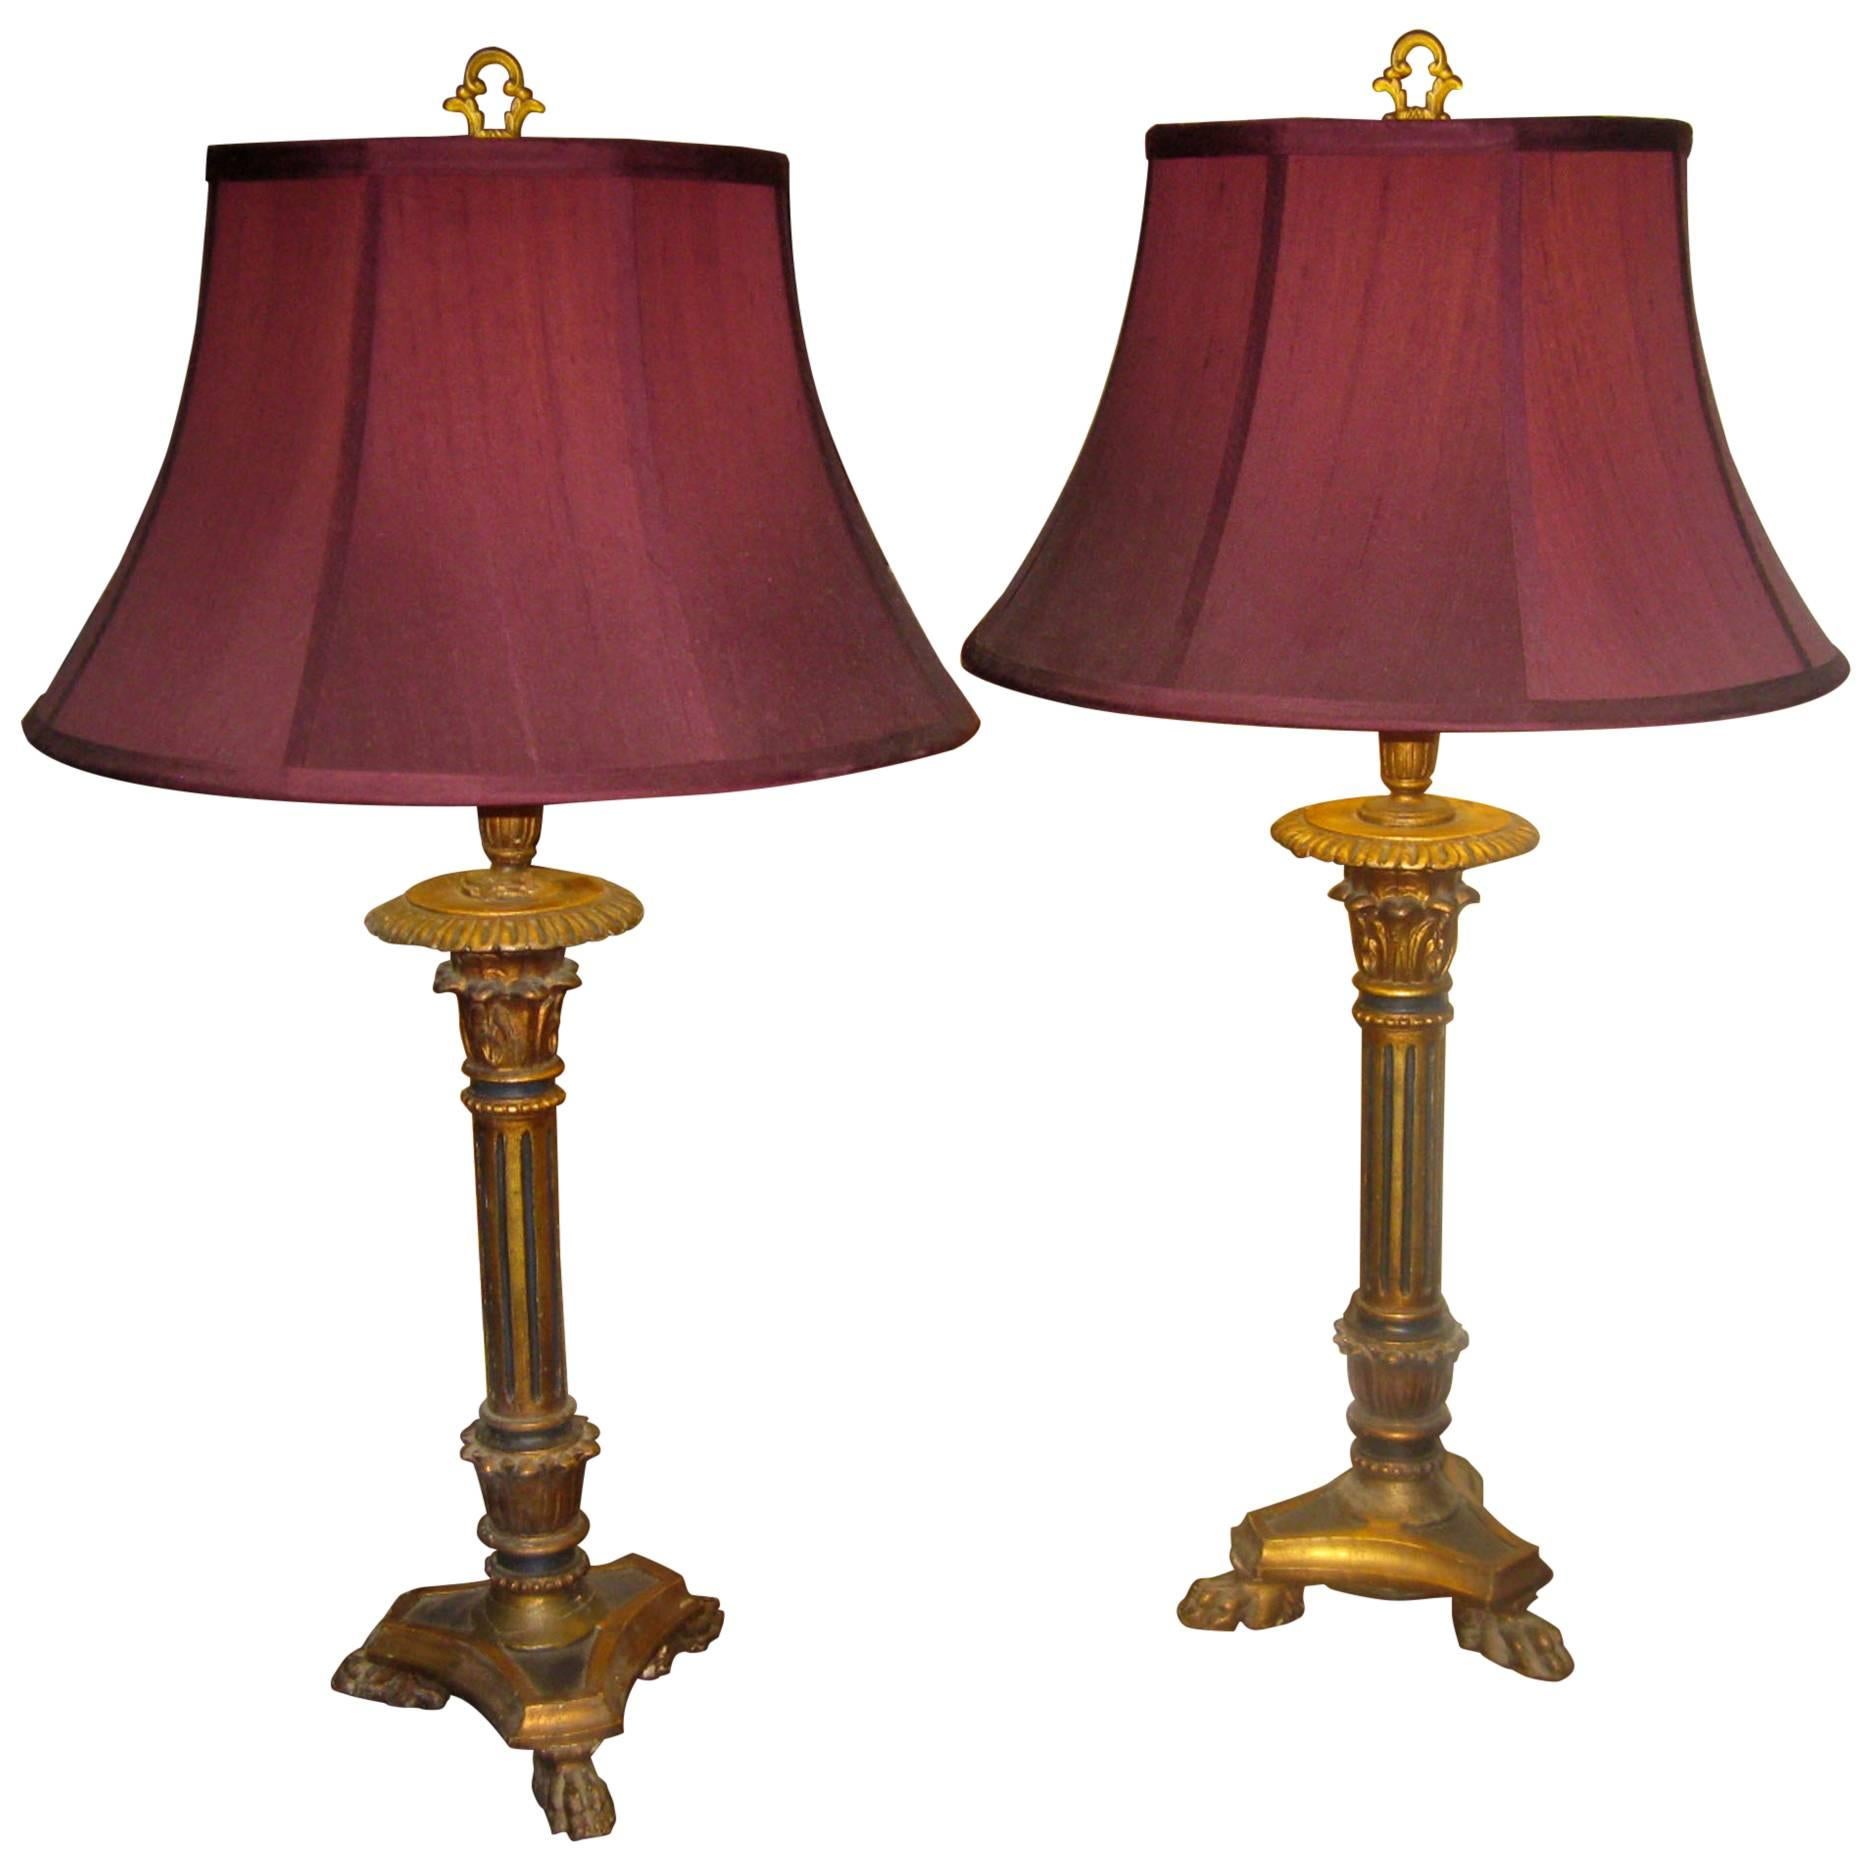 19th century Giltwood Converted Candlestick Lamp Pair